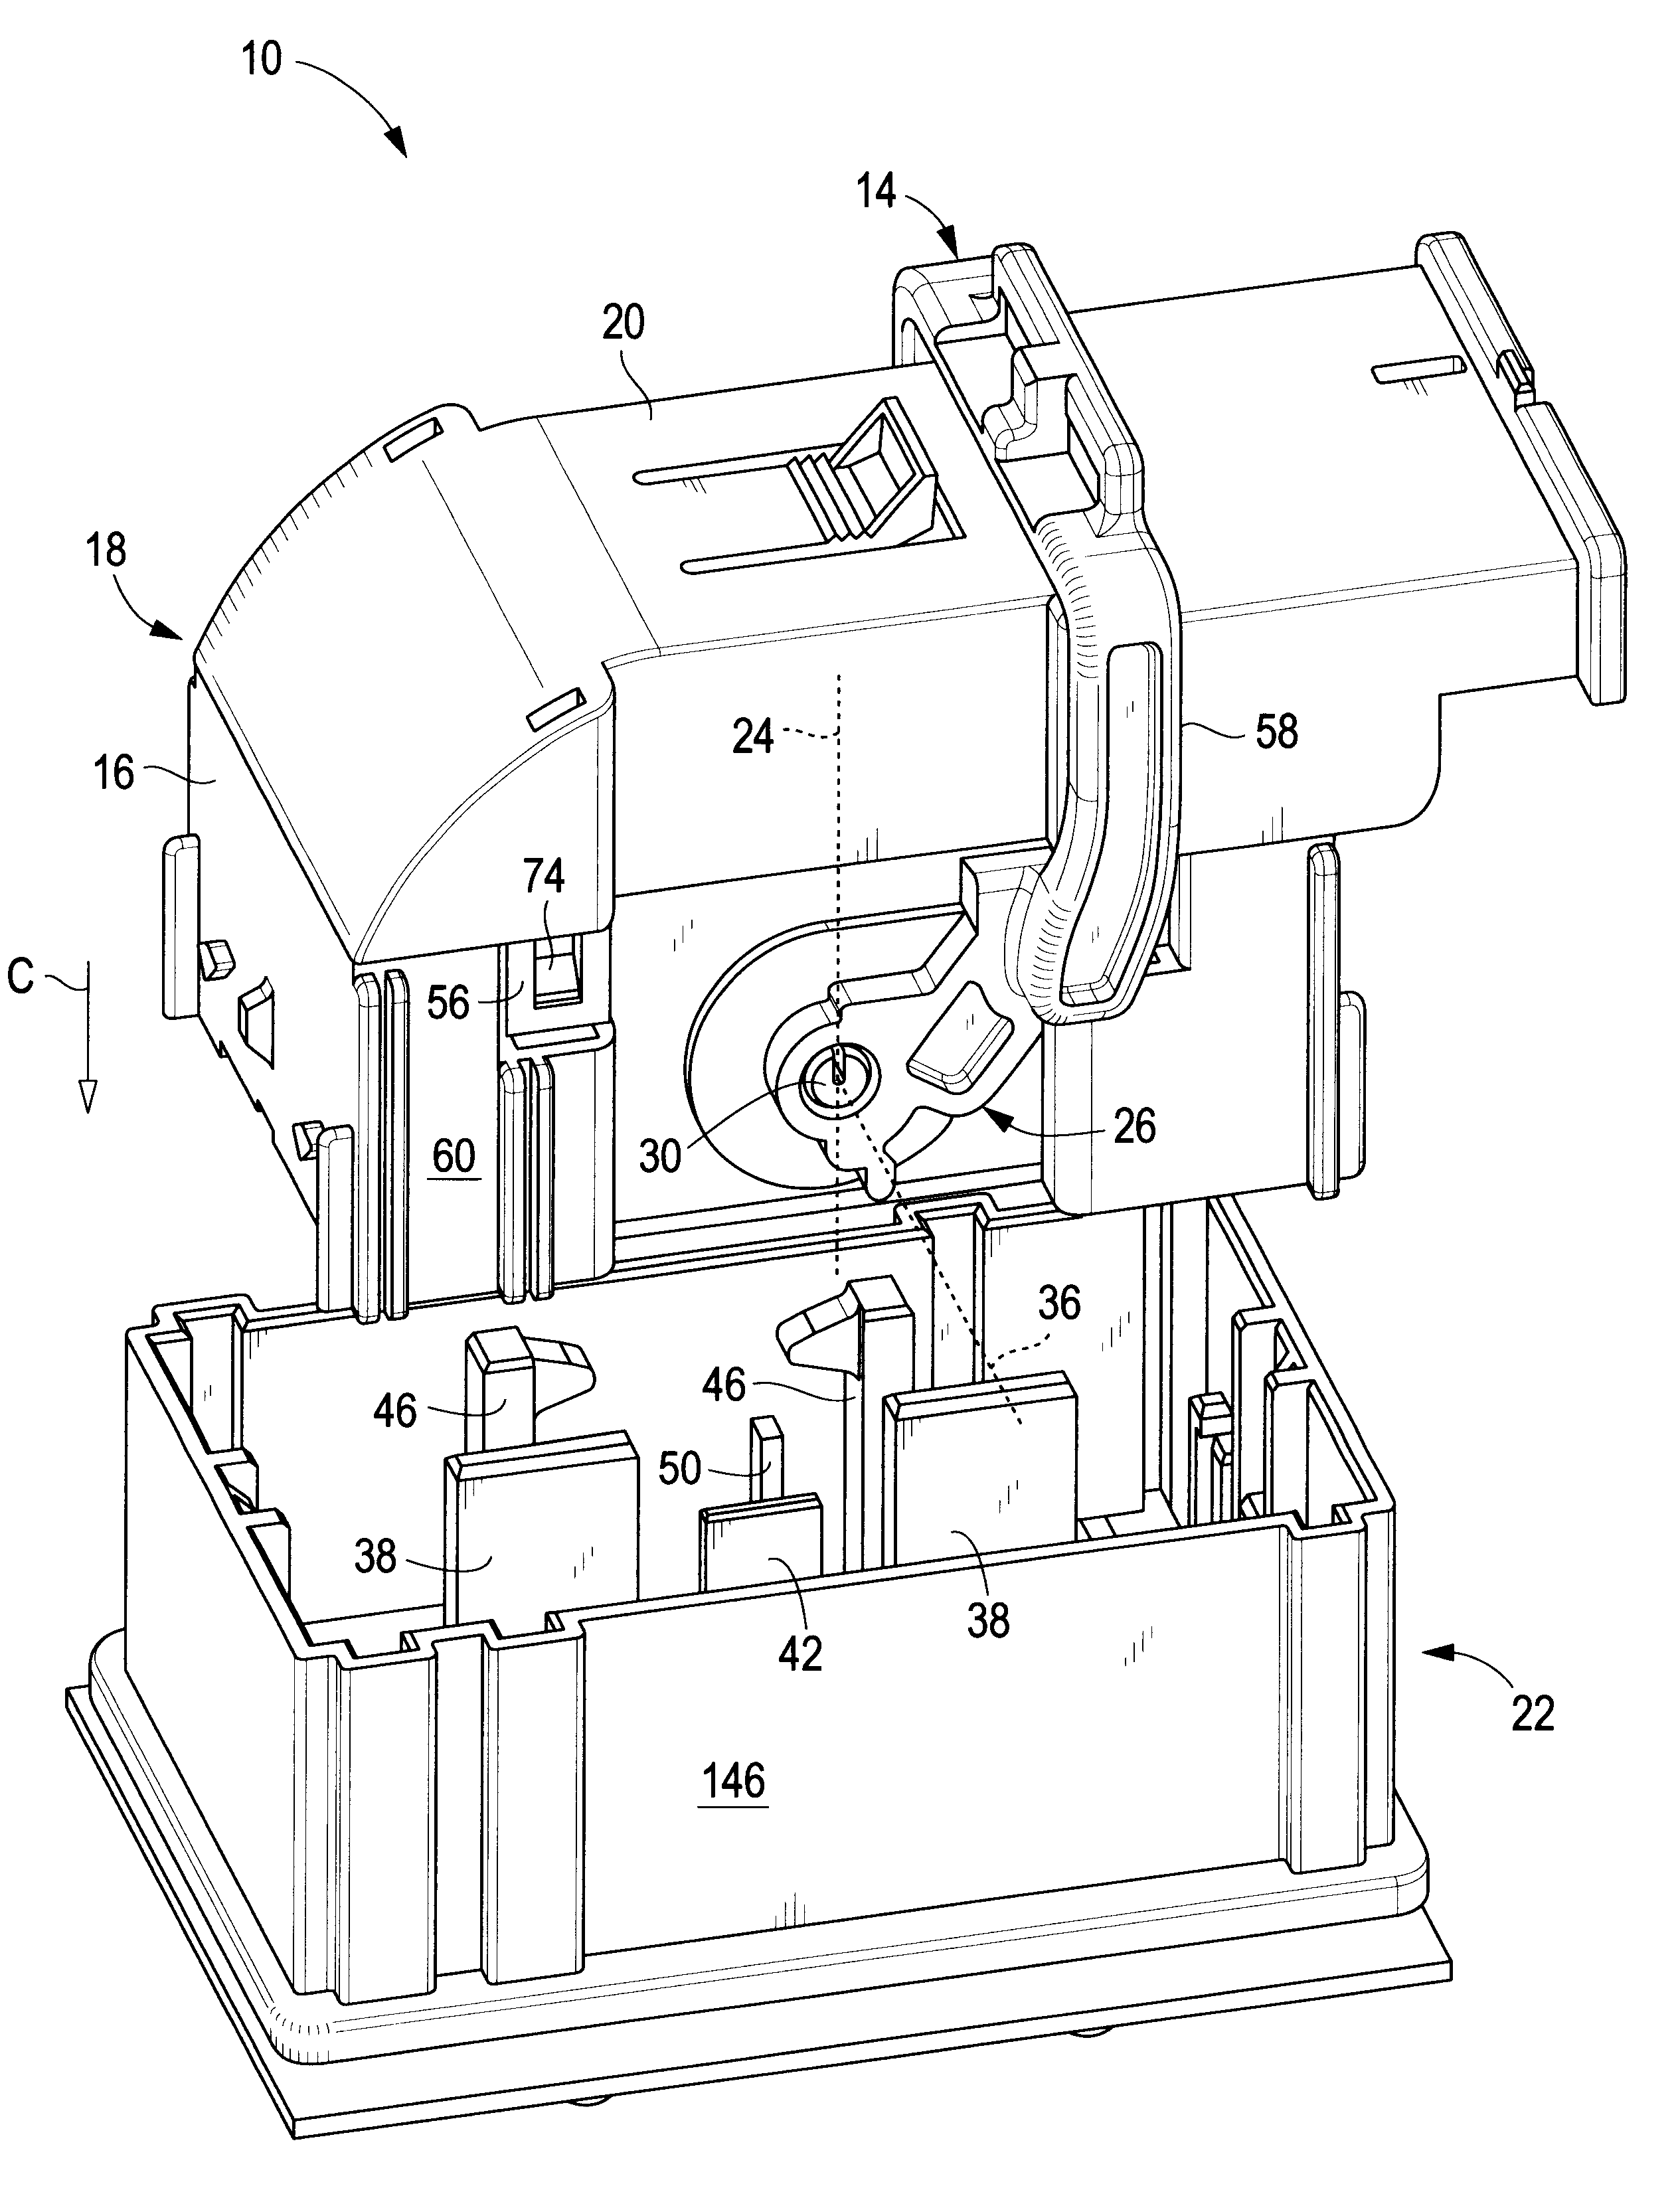 Mate assist assembly for connecting electrical contacts